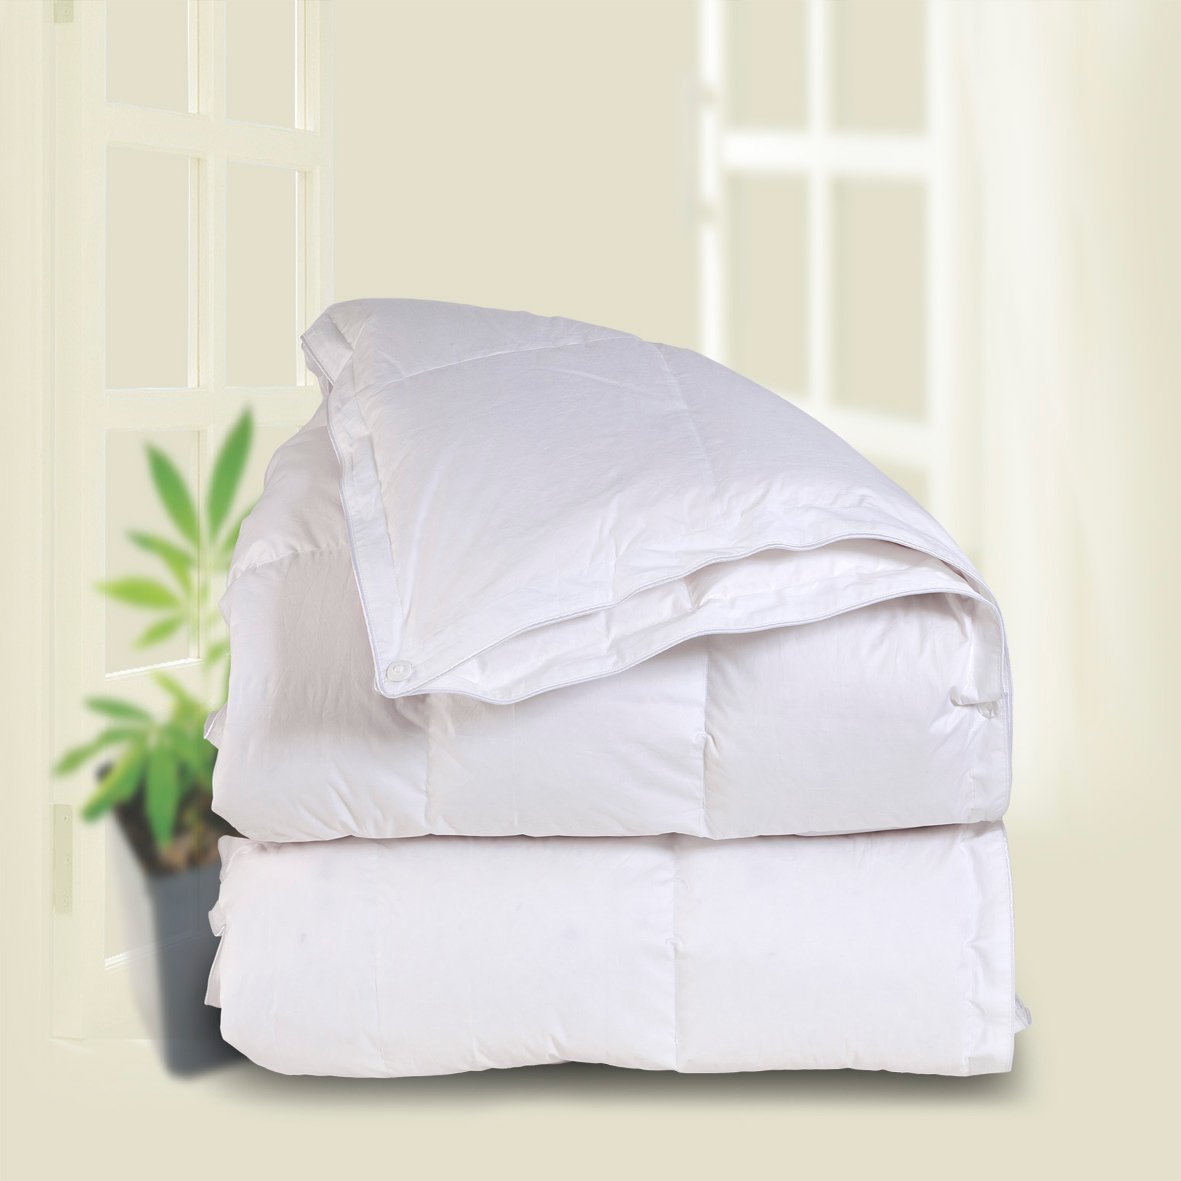 3-In-1 White Goose Down Comforter by Downright | Fig Linens 